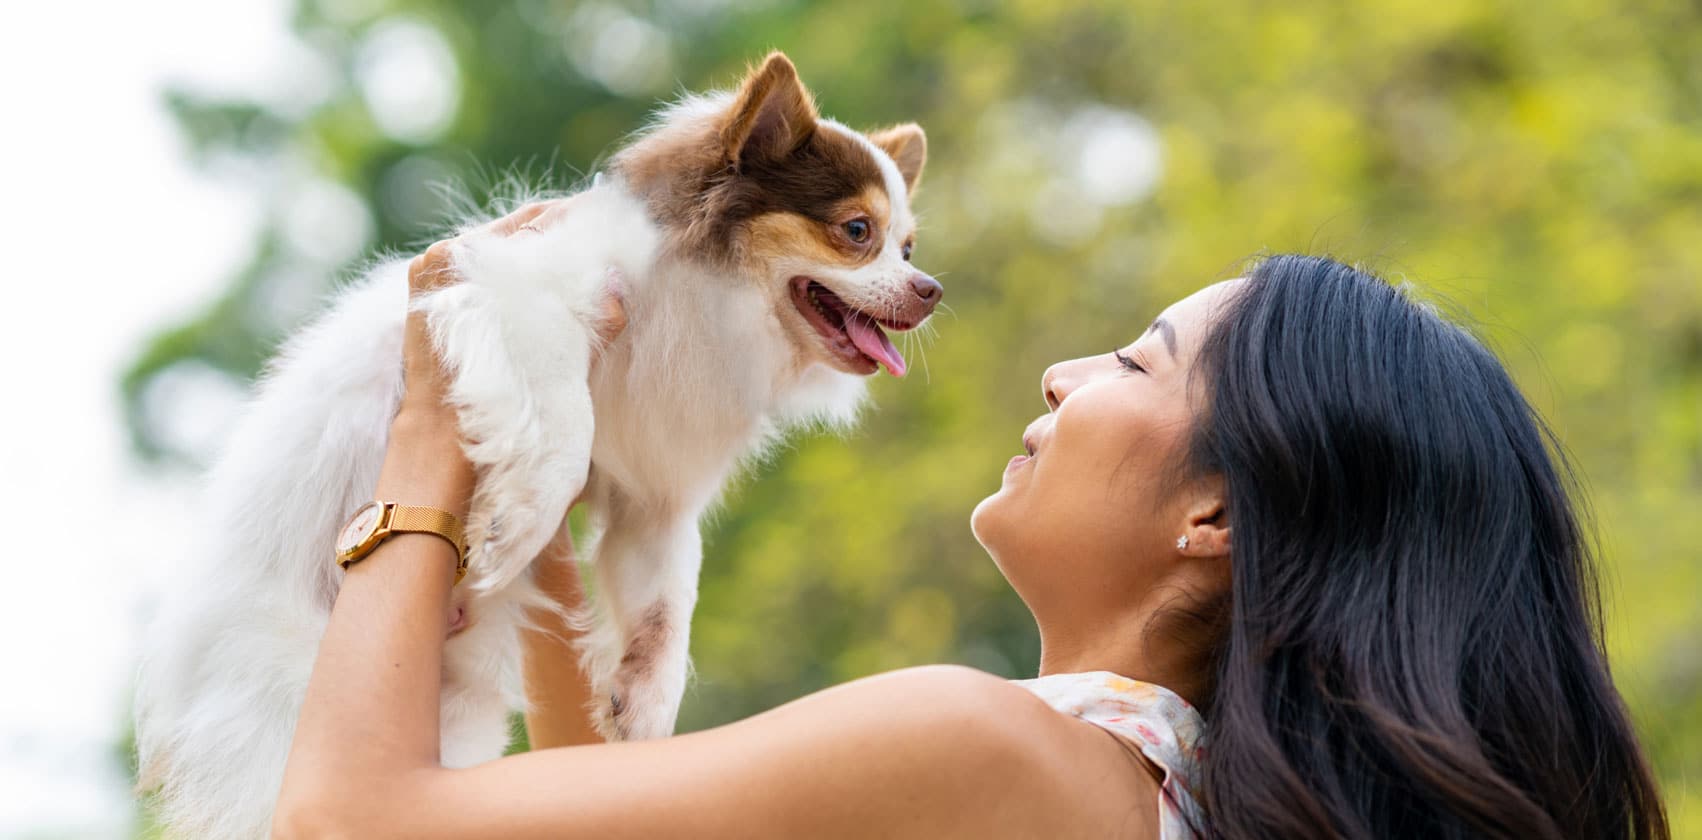 3 ways to bond with your pet this summer - Woman lifting her dog up